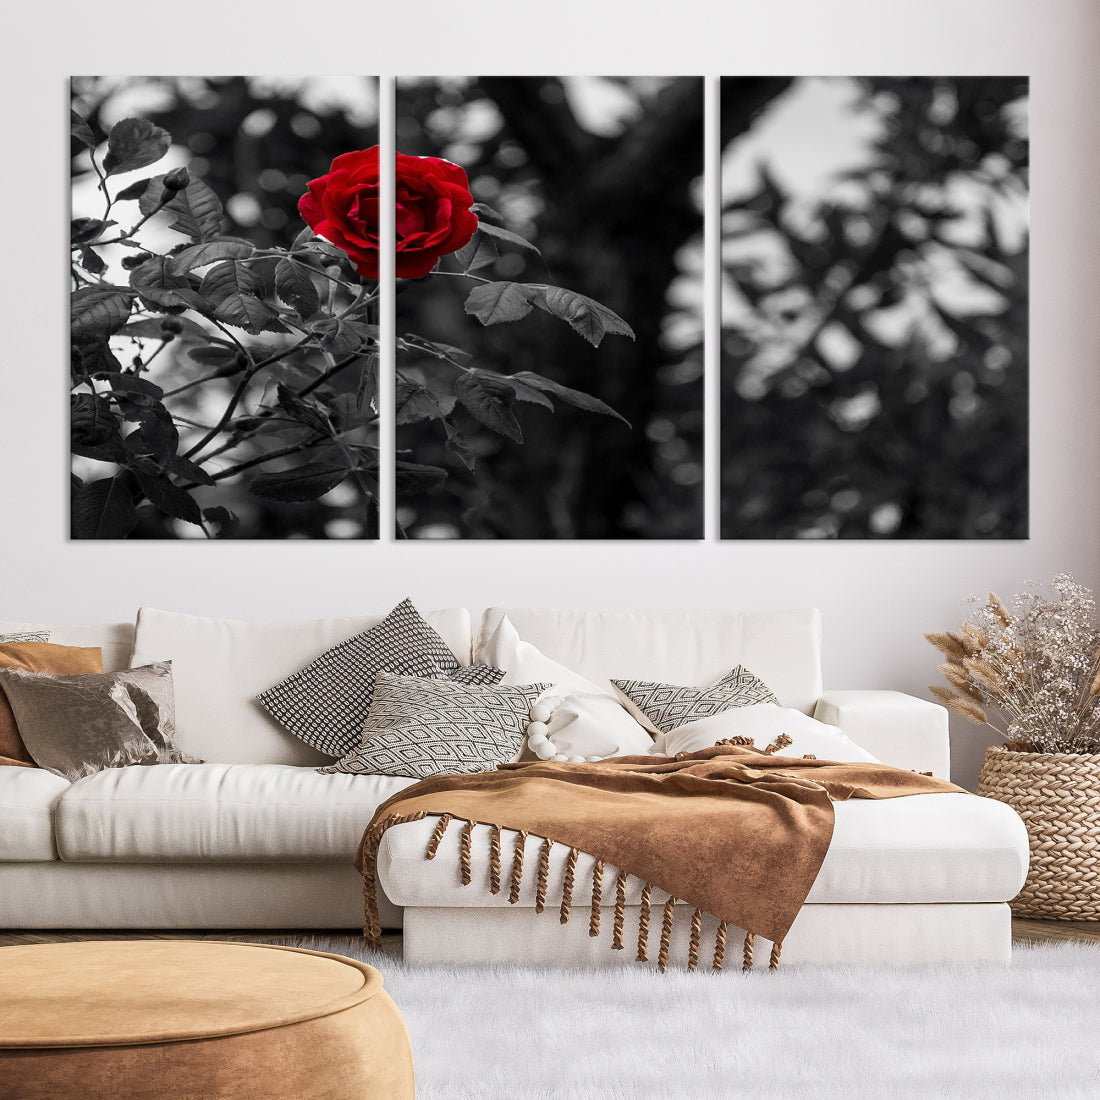 Red Rose with Black & White Background Love Canvas Wall Art Print Rose Canvas Art Love Artwork